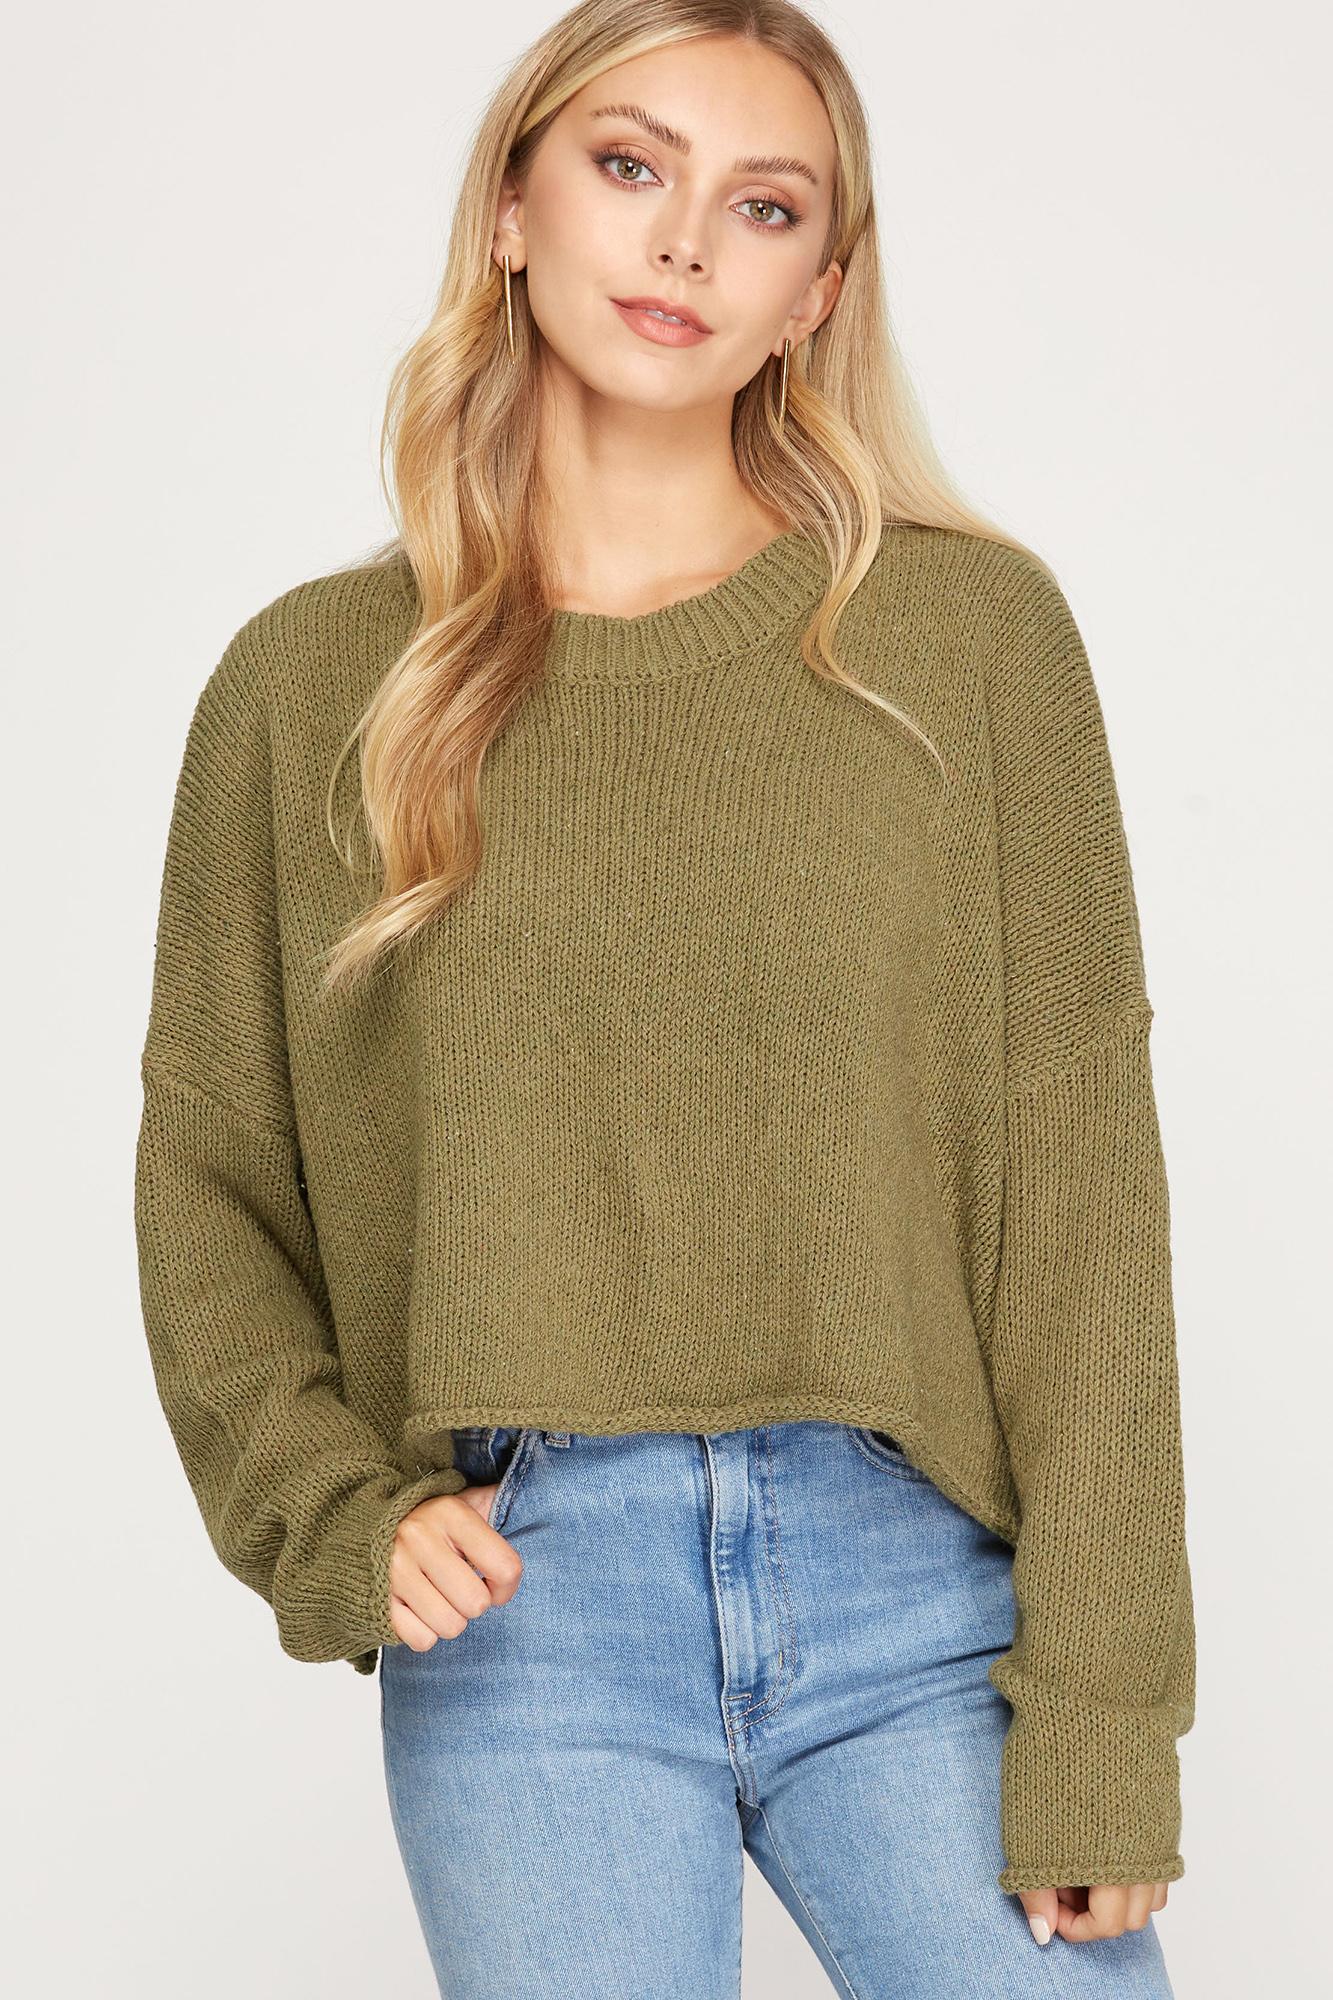 Hold Me Tight Cropped Sweater